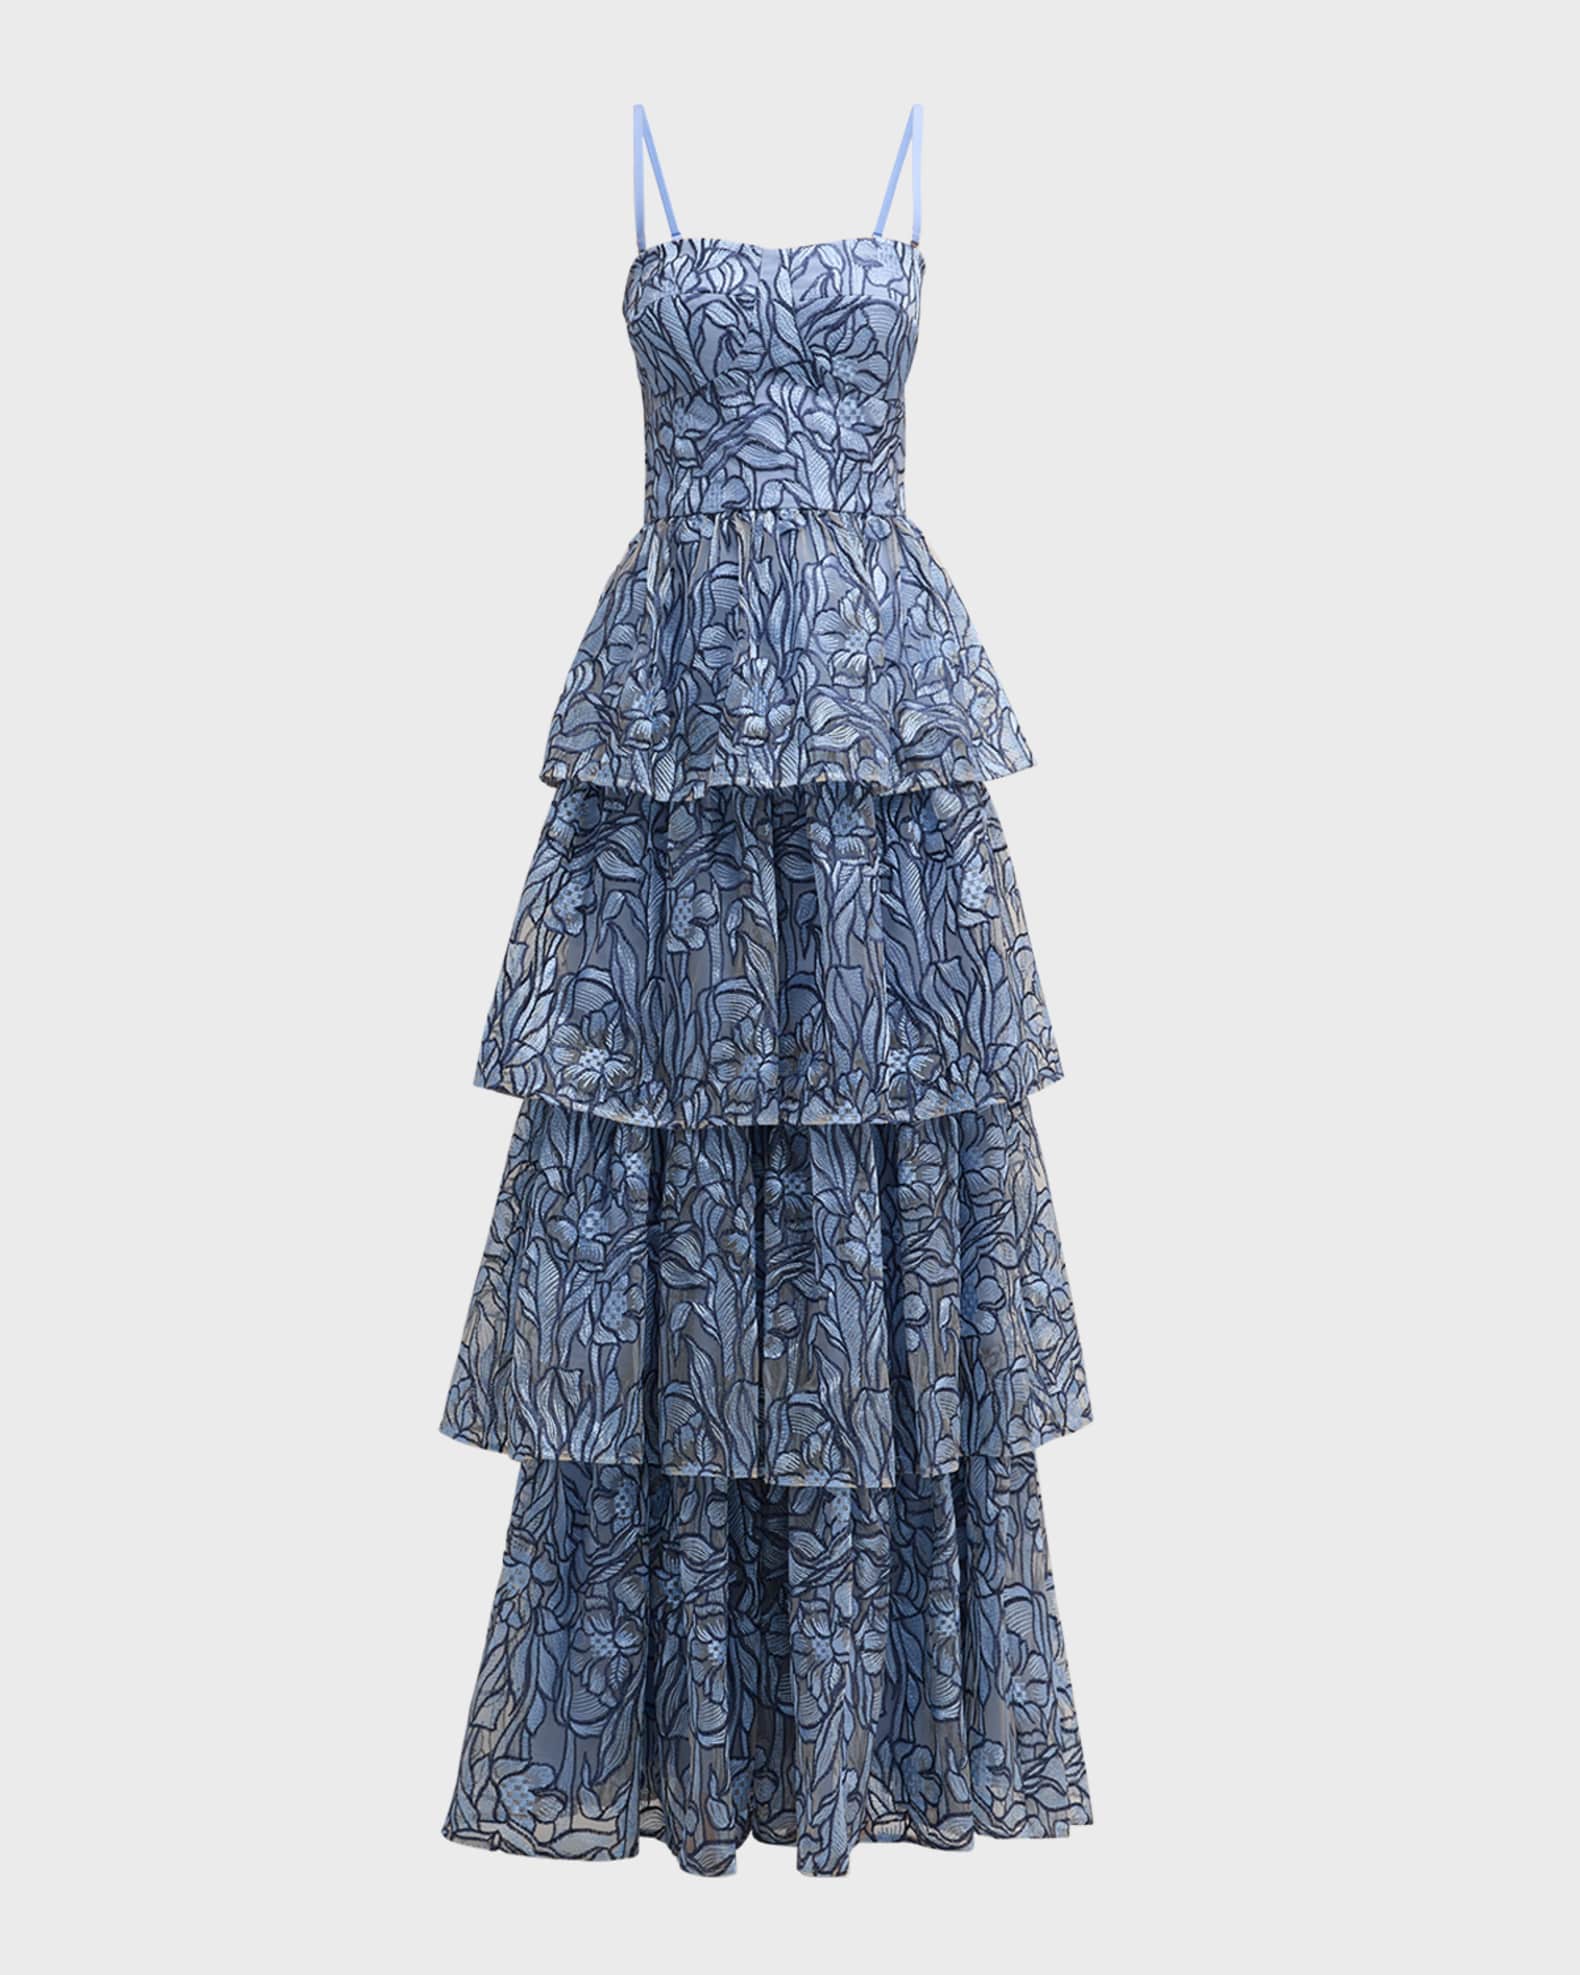 Aubriella Ruffle Tiered Floral-Embroidered Gown | Neiman Marcus